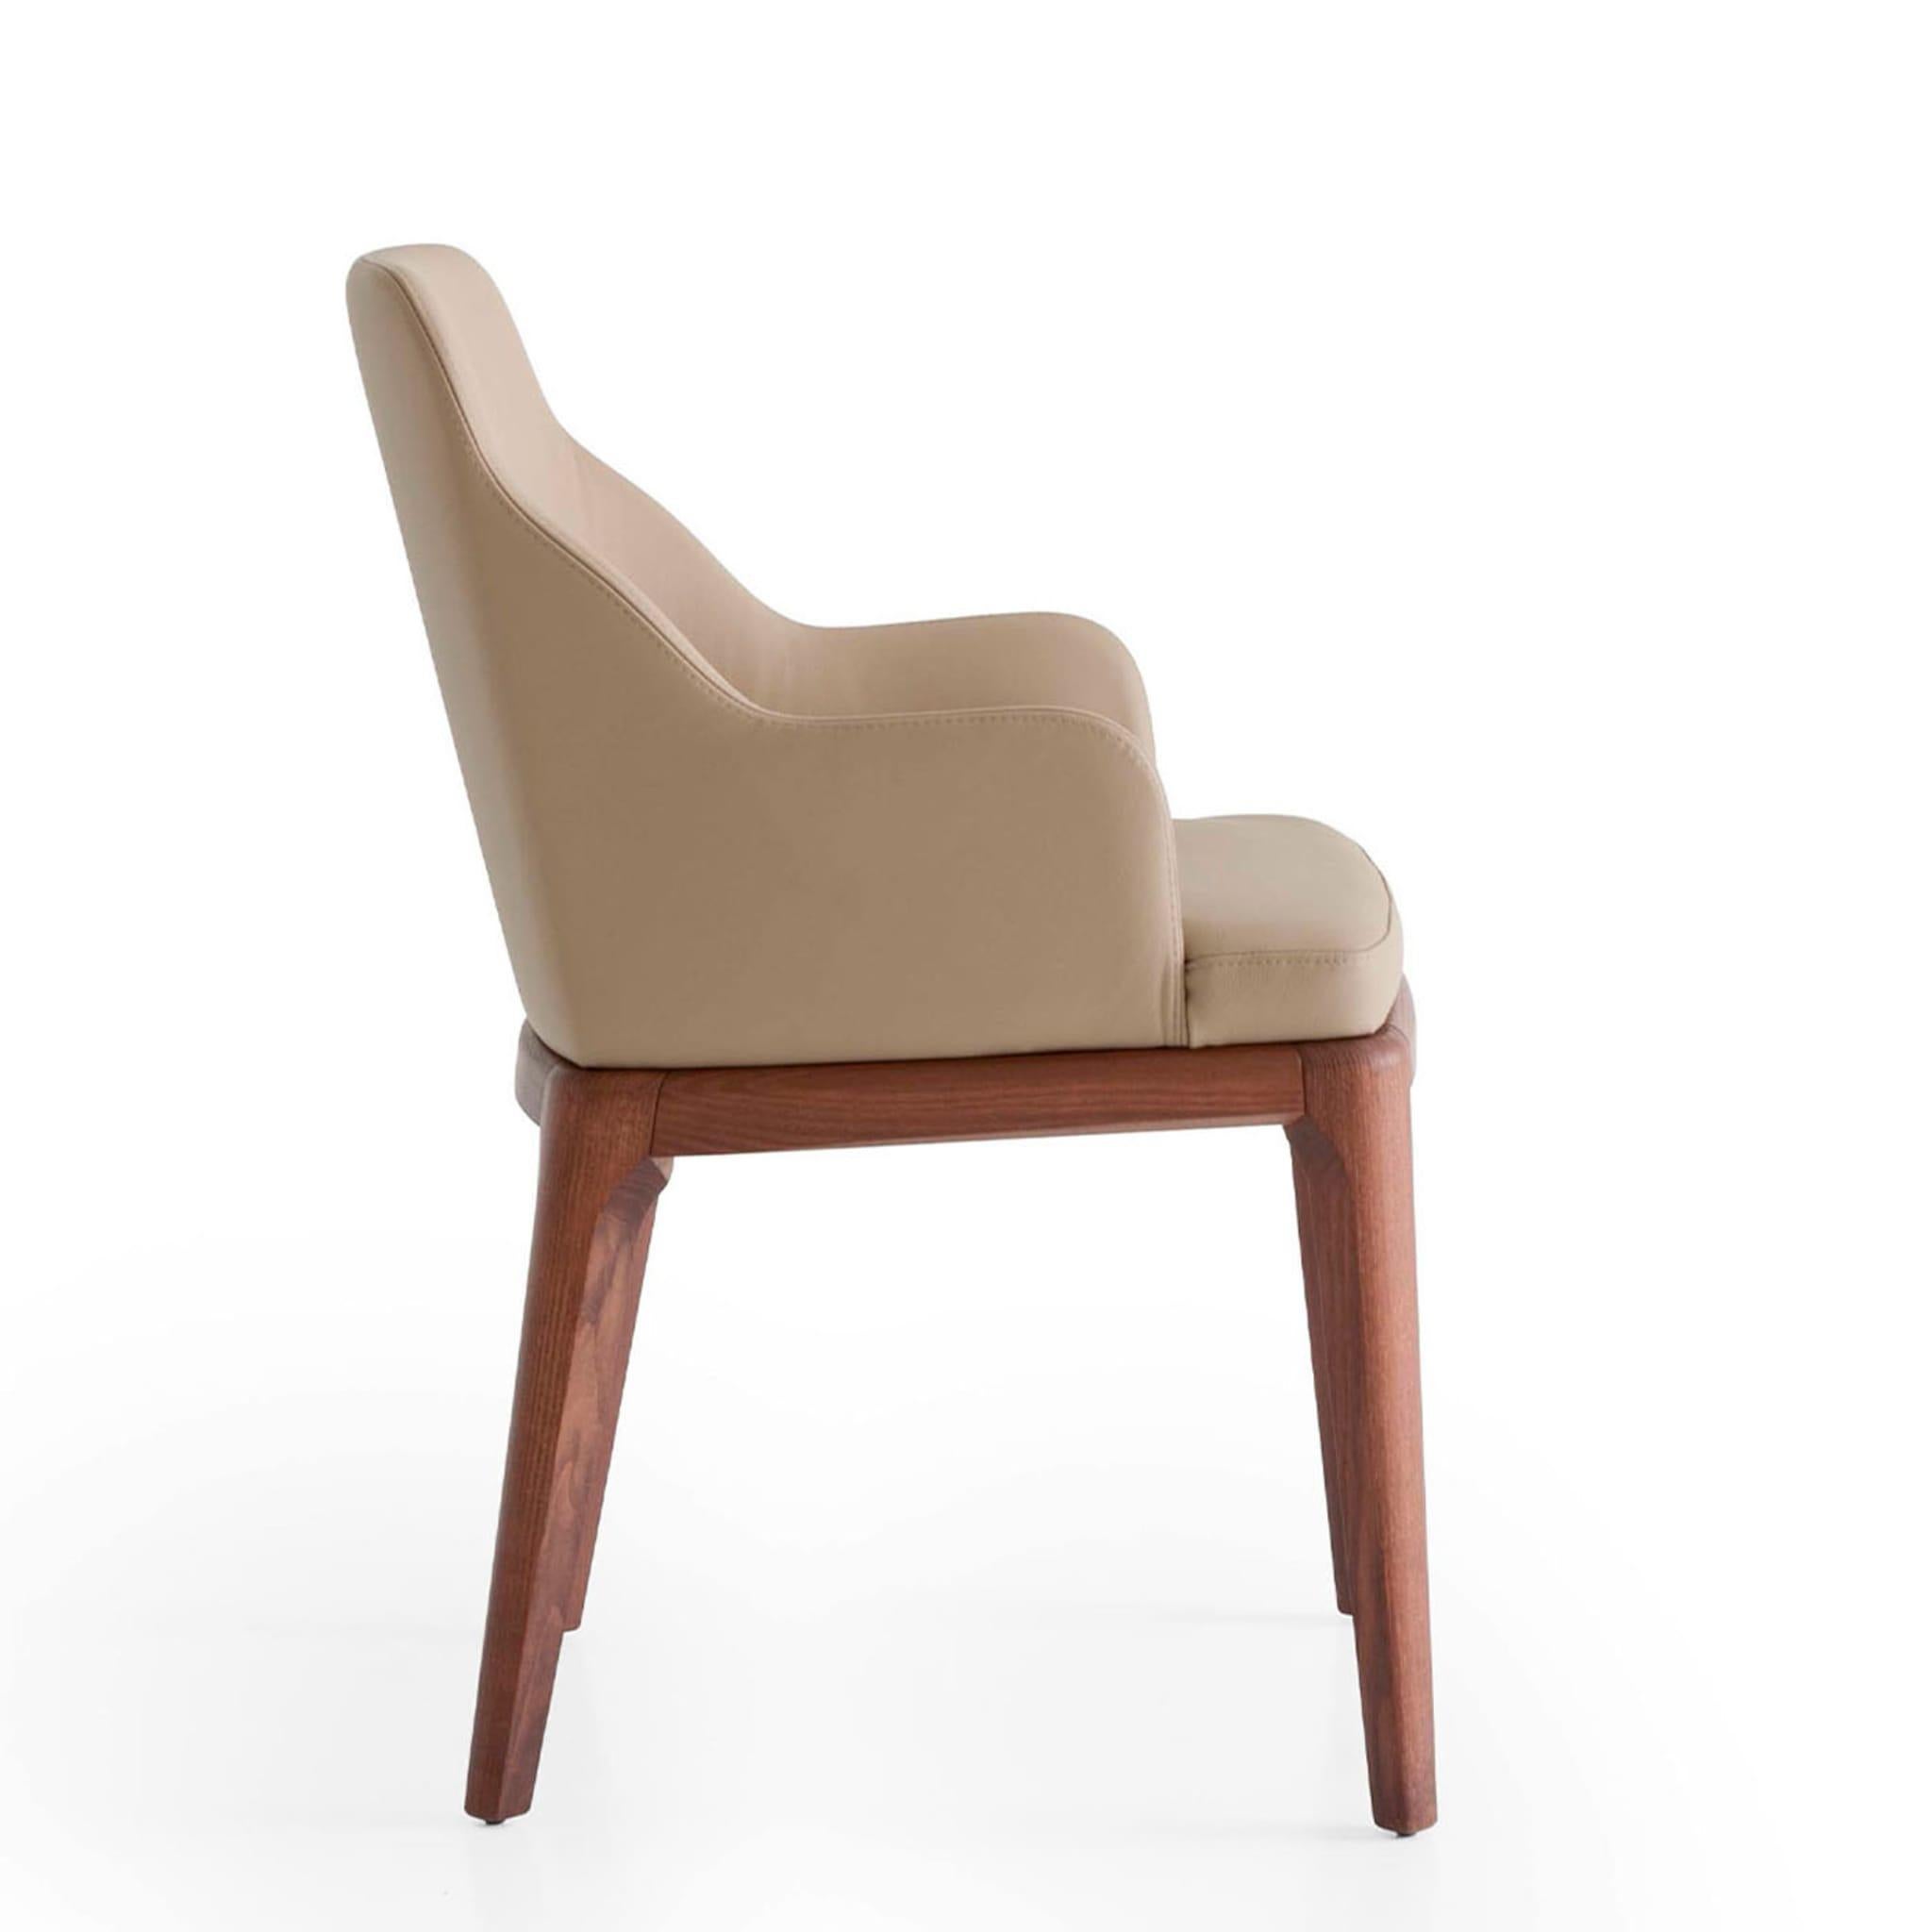 At once graceful and seductive, this armchair elegantly combines exclusive materials and warm neutrals. Sleek ash legs enriched with walnut stain sustain the seating unit, its enveloping wooden shell marked by sinuously sloped sides incorporating